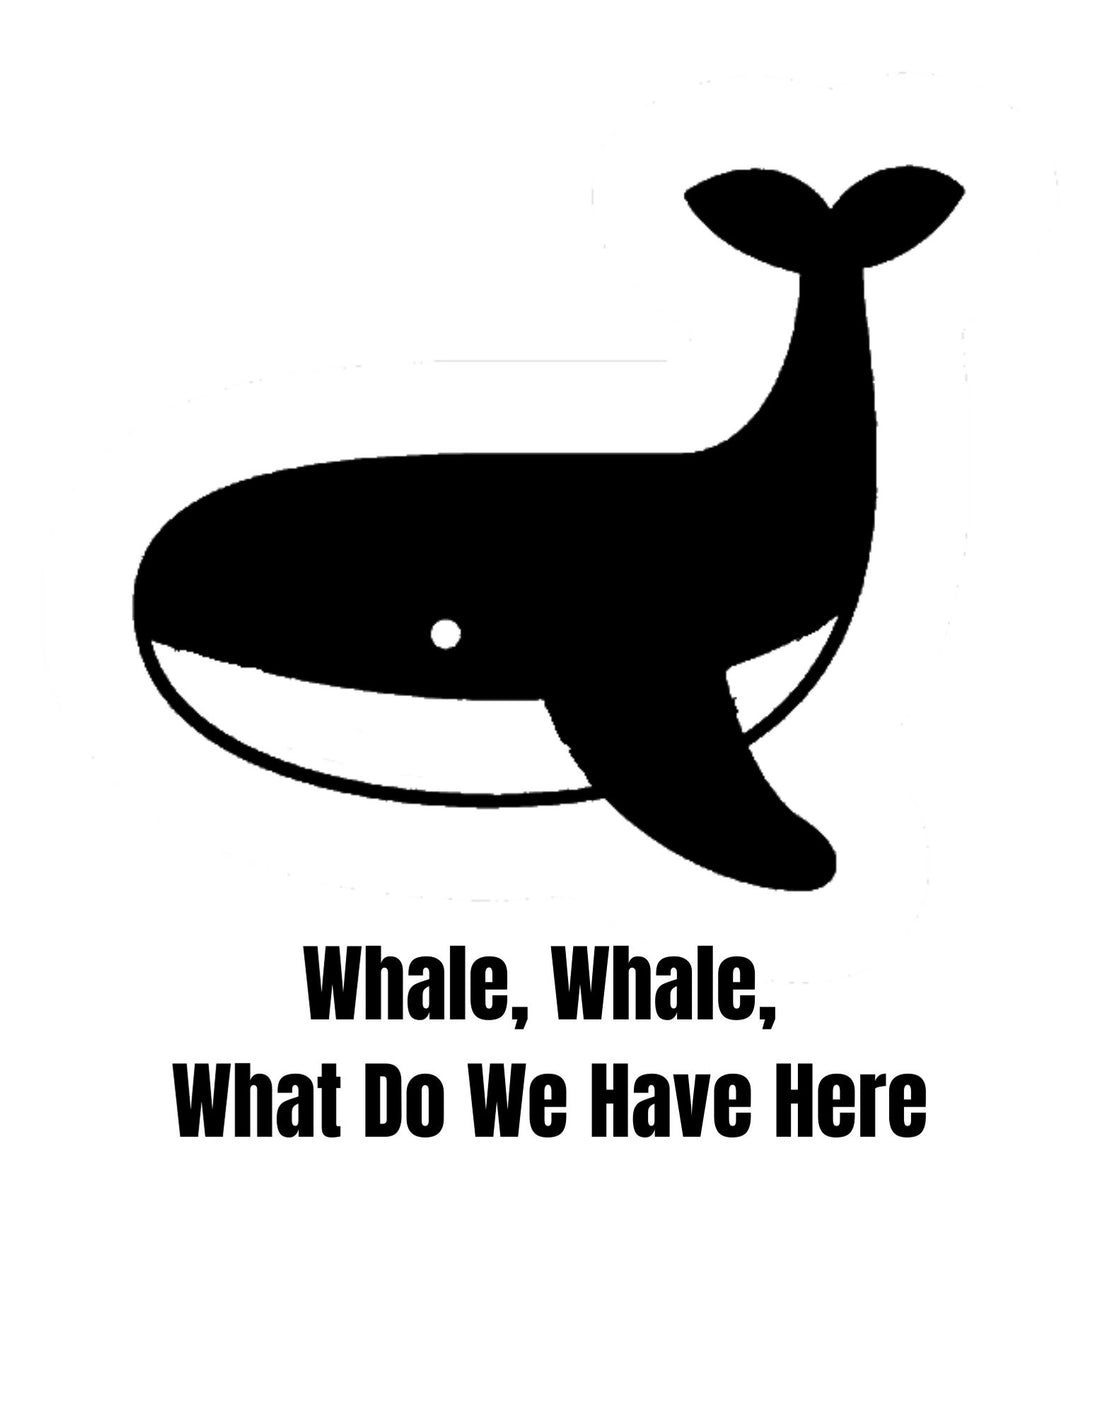 Whale, Whale, What do we have here?